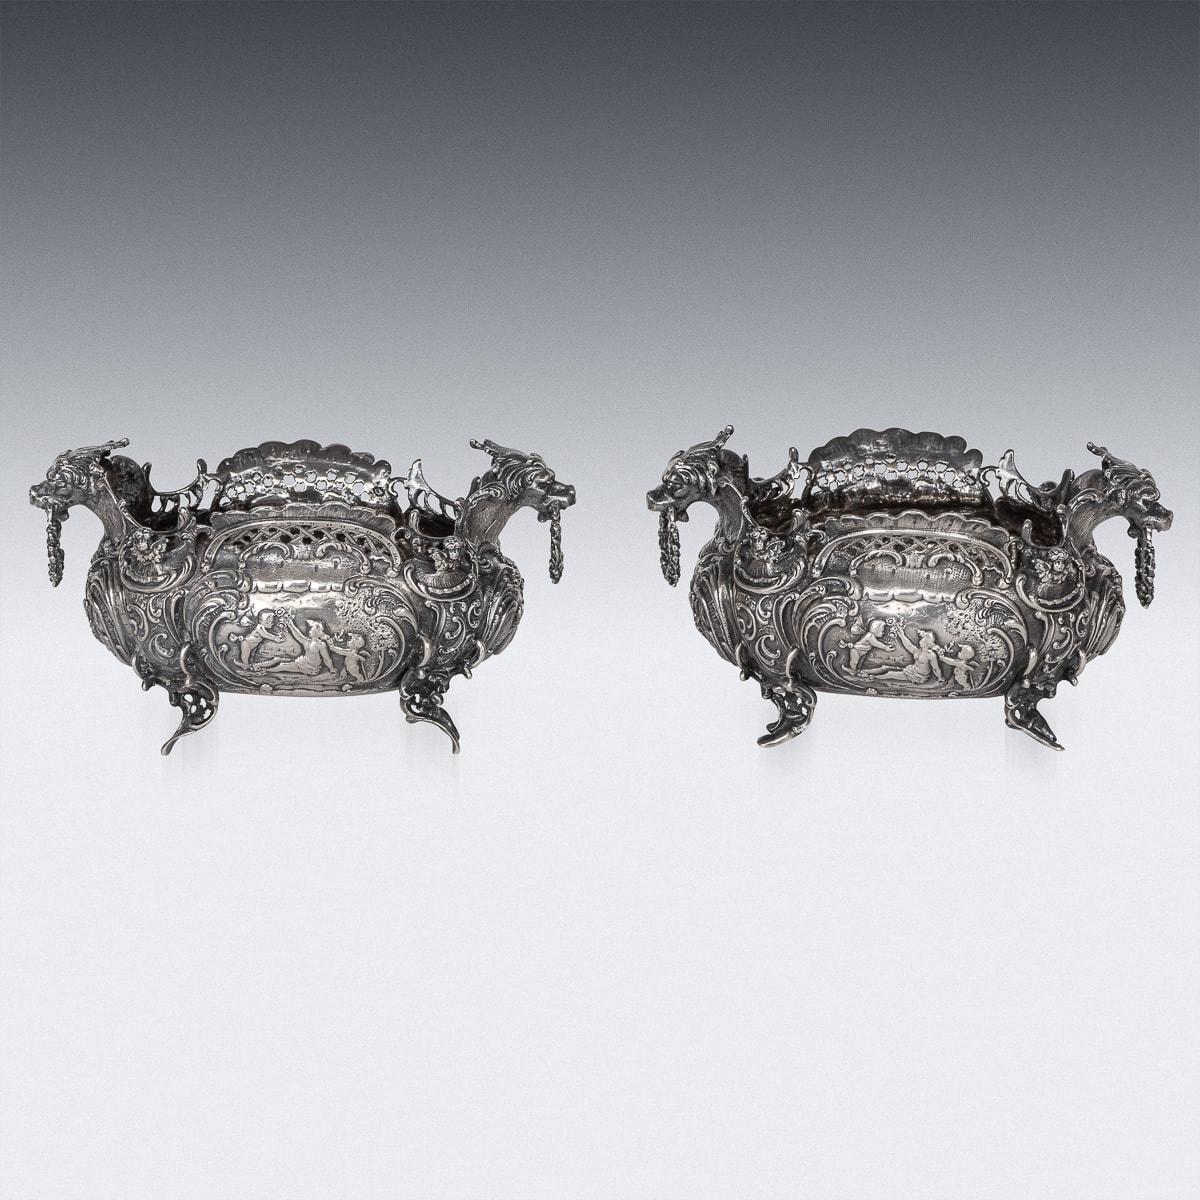 Antique late-19th Century German pair of solid silver bowls, each exceptionally decorative and ornamental on four scroll feet, the sides embossed and chased in high relief with classical scenes, depicting putti and angels, carrying flowers,